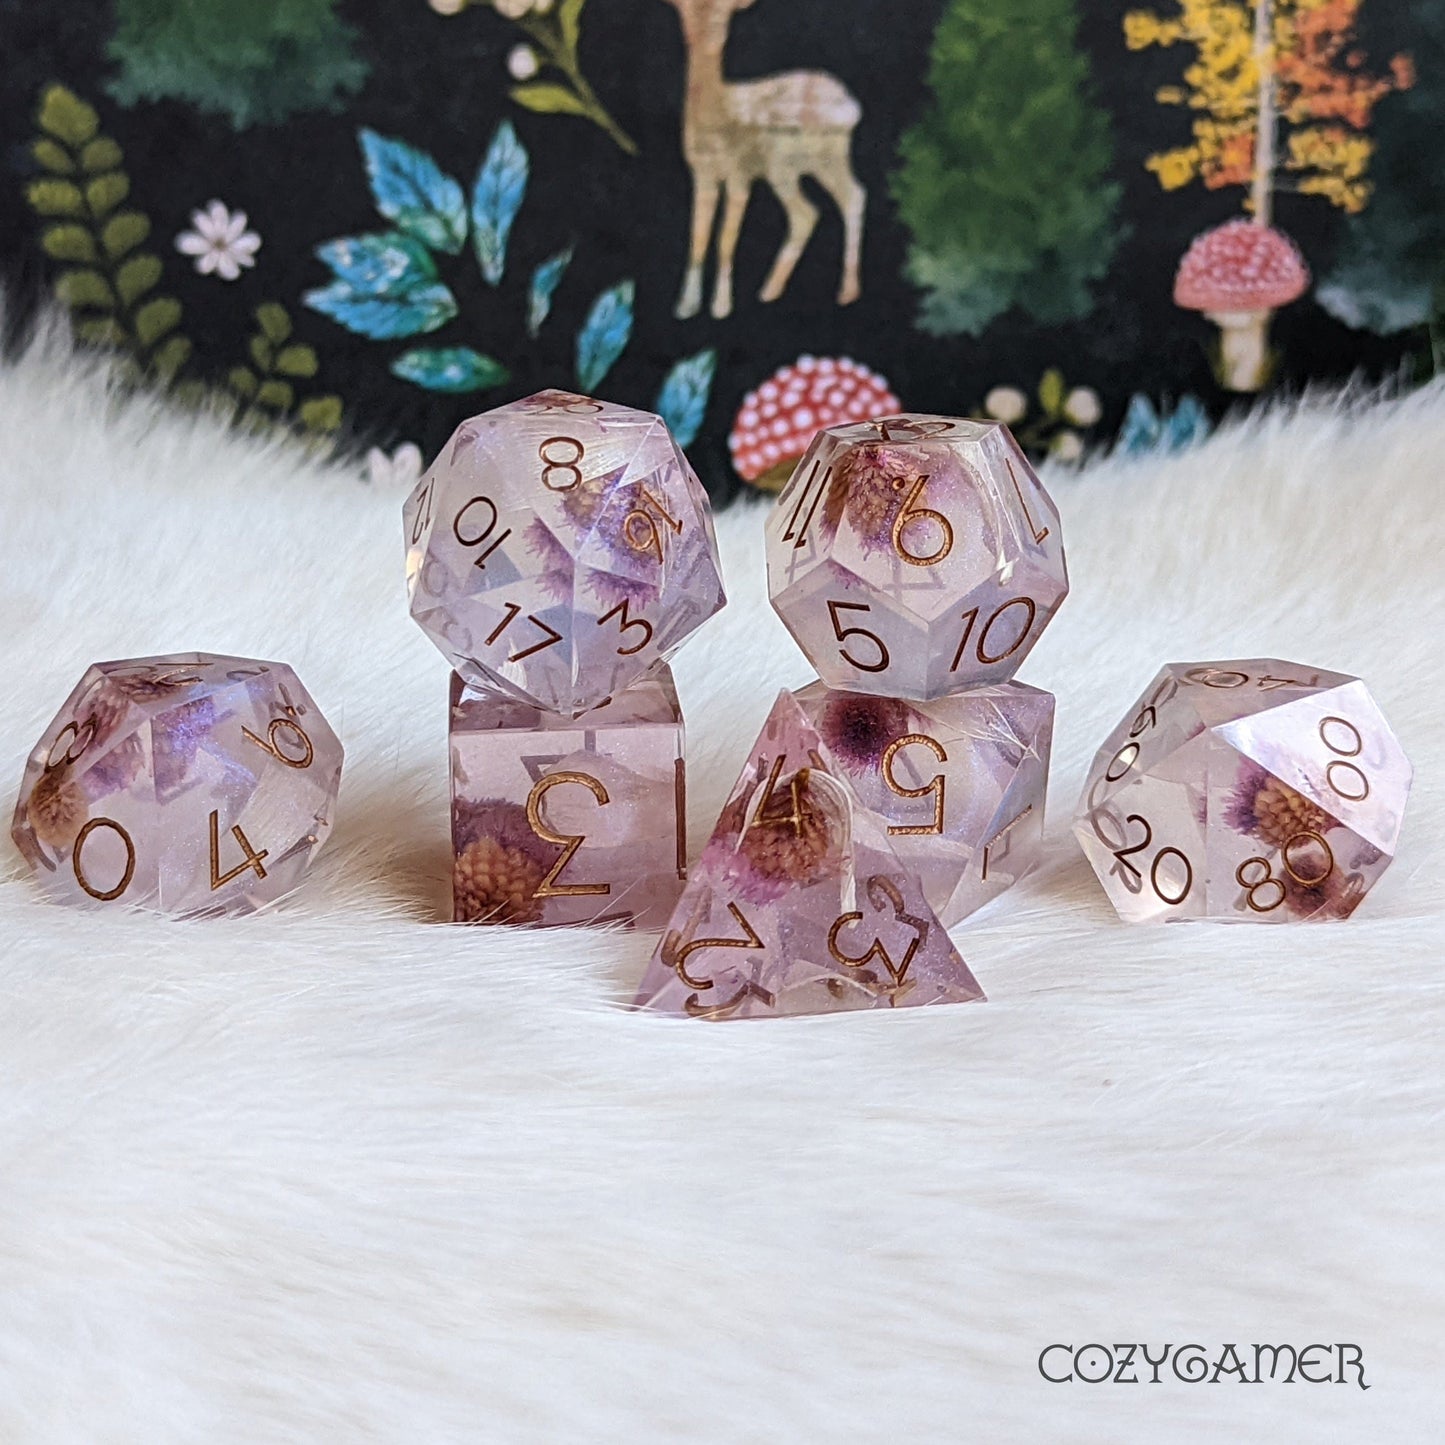 Thistle Handmade Sharp Edge Resin Dice Set. 7 Piece DND dice set with real dried flowers inside